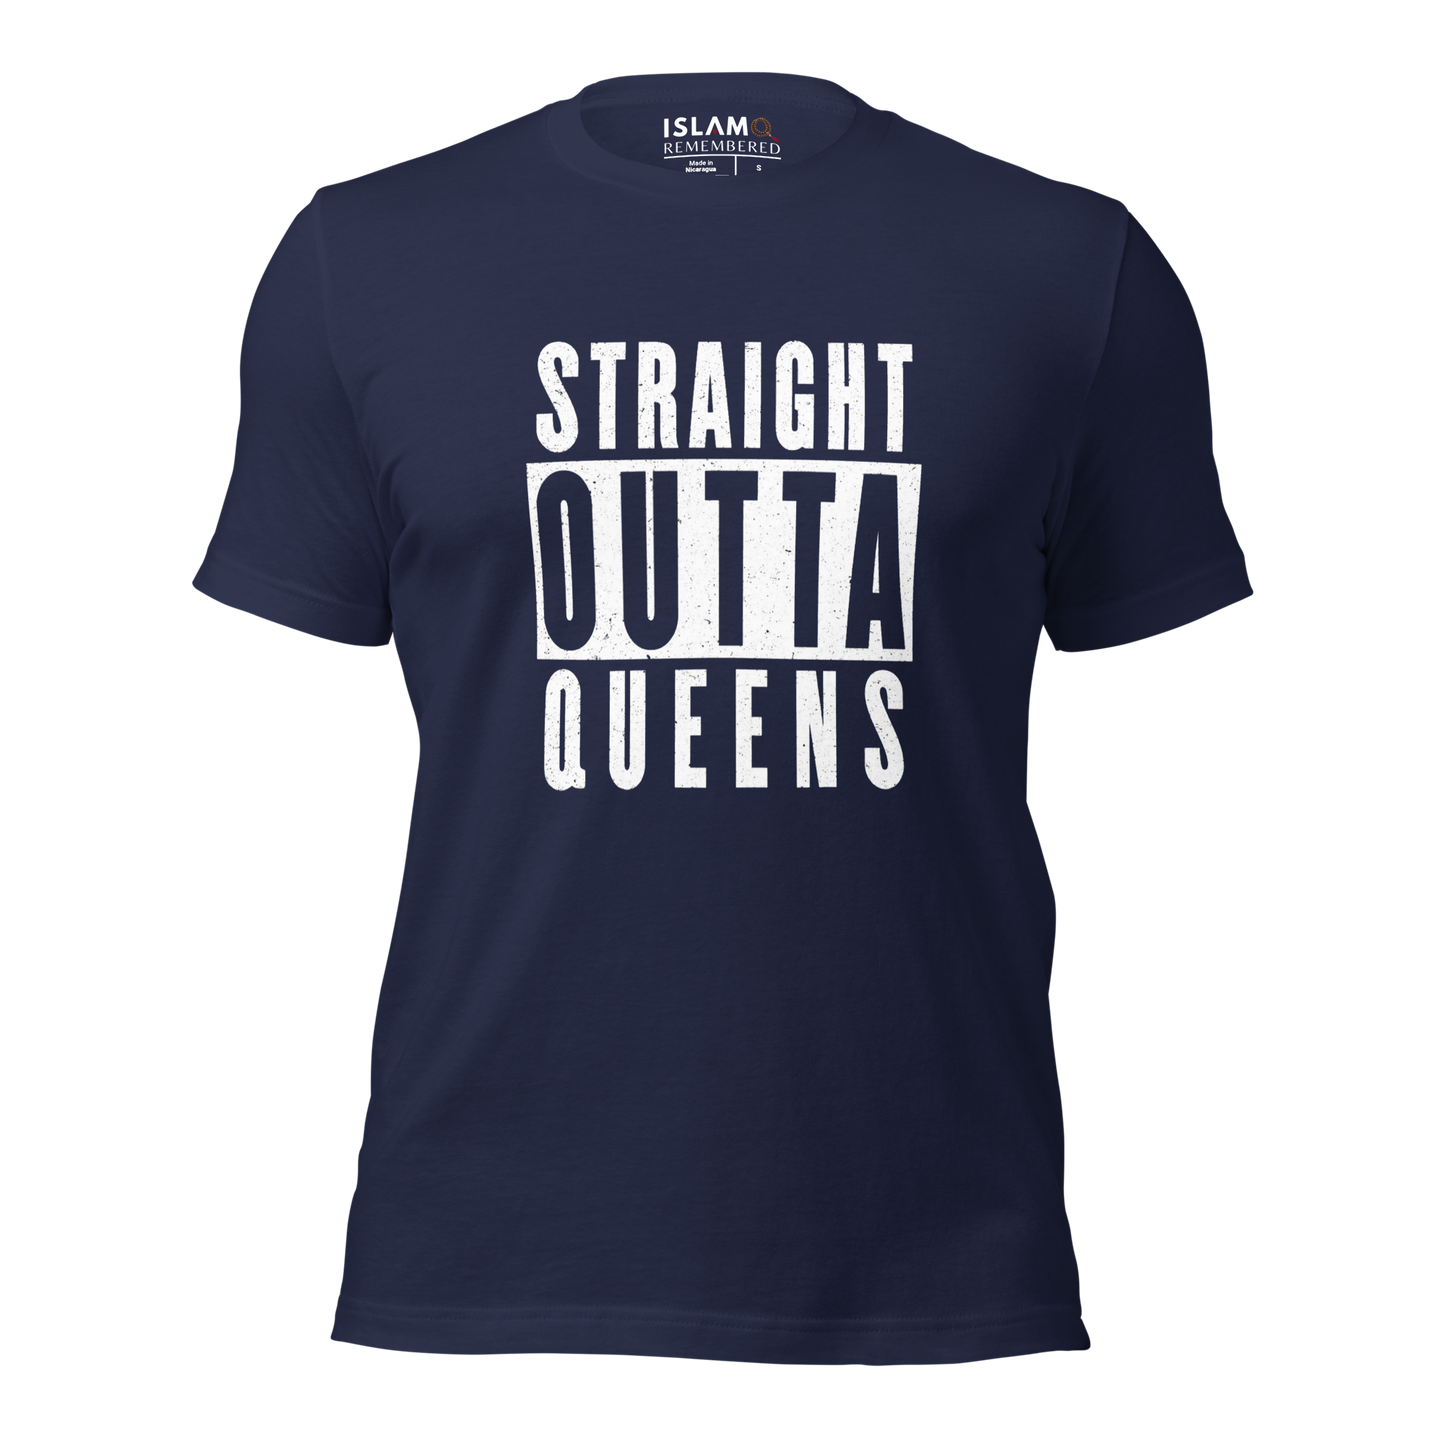 ADULT T-Shirt - STRAIGHT OUTTA QUEENS